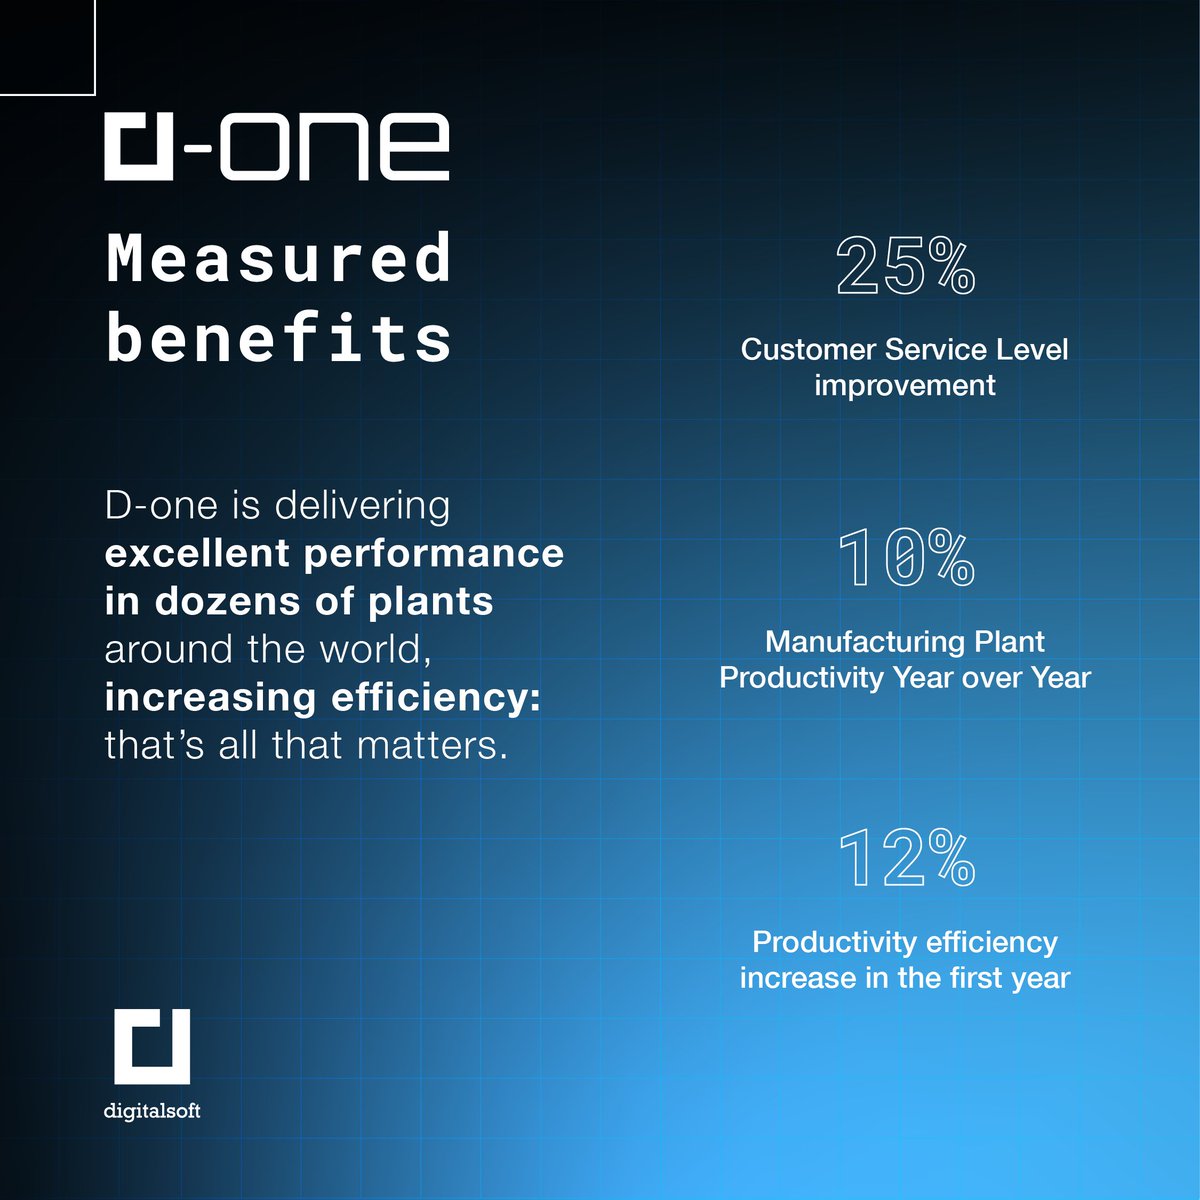 Industrial automation aims to achieve unparalleled efficiency, representing its core objective, and agility in manufacturing is key within the digitization efforts of a plant. d-one boosts productivity and yields clear, quantifiable advantages.